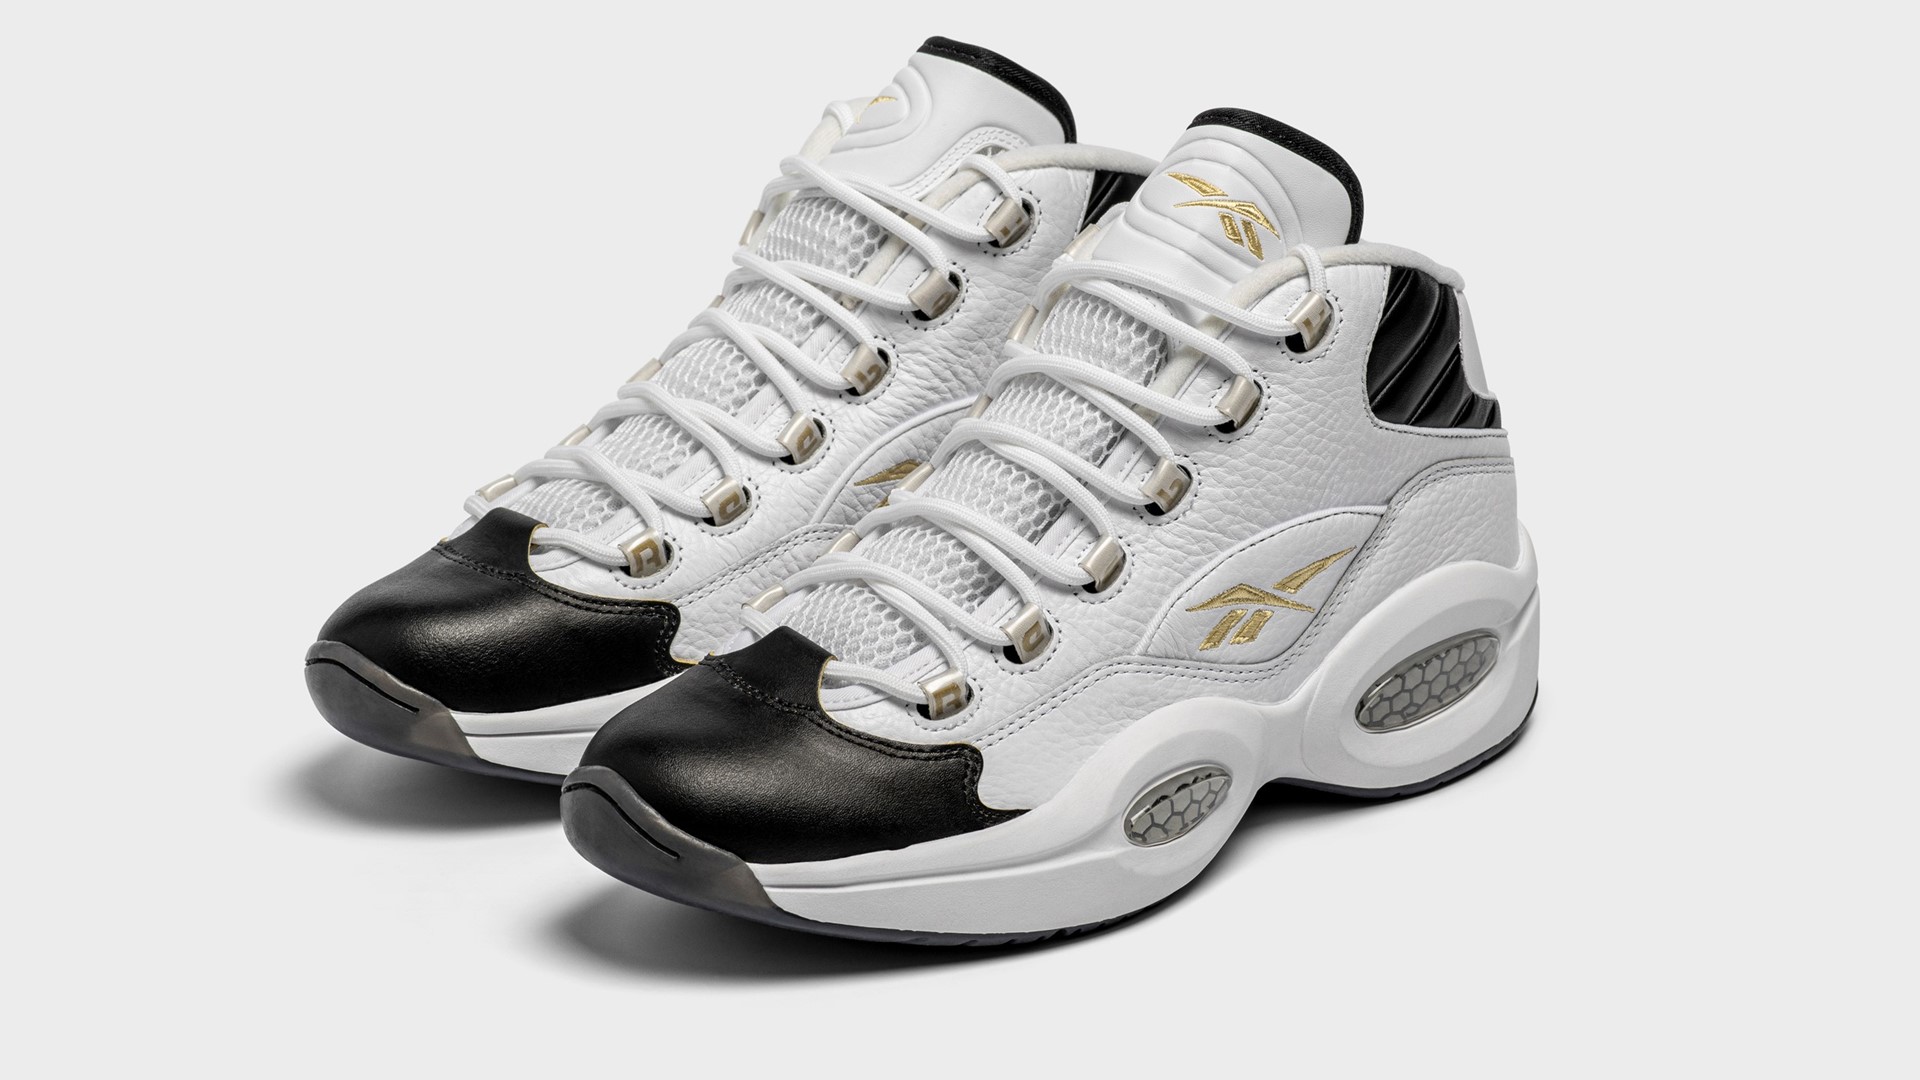 Reebok News Stream : Reebok Debuts Question Mid “Respect My Shine” Nodding Iverson and Enabling Wearers to Earn Their Shine